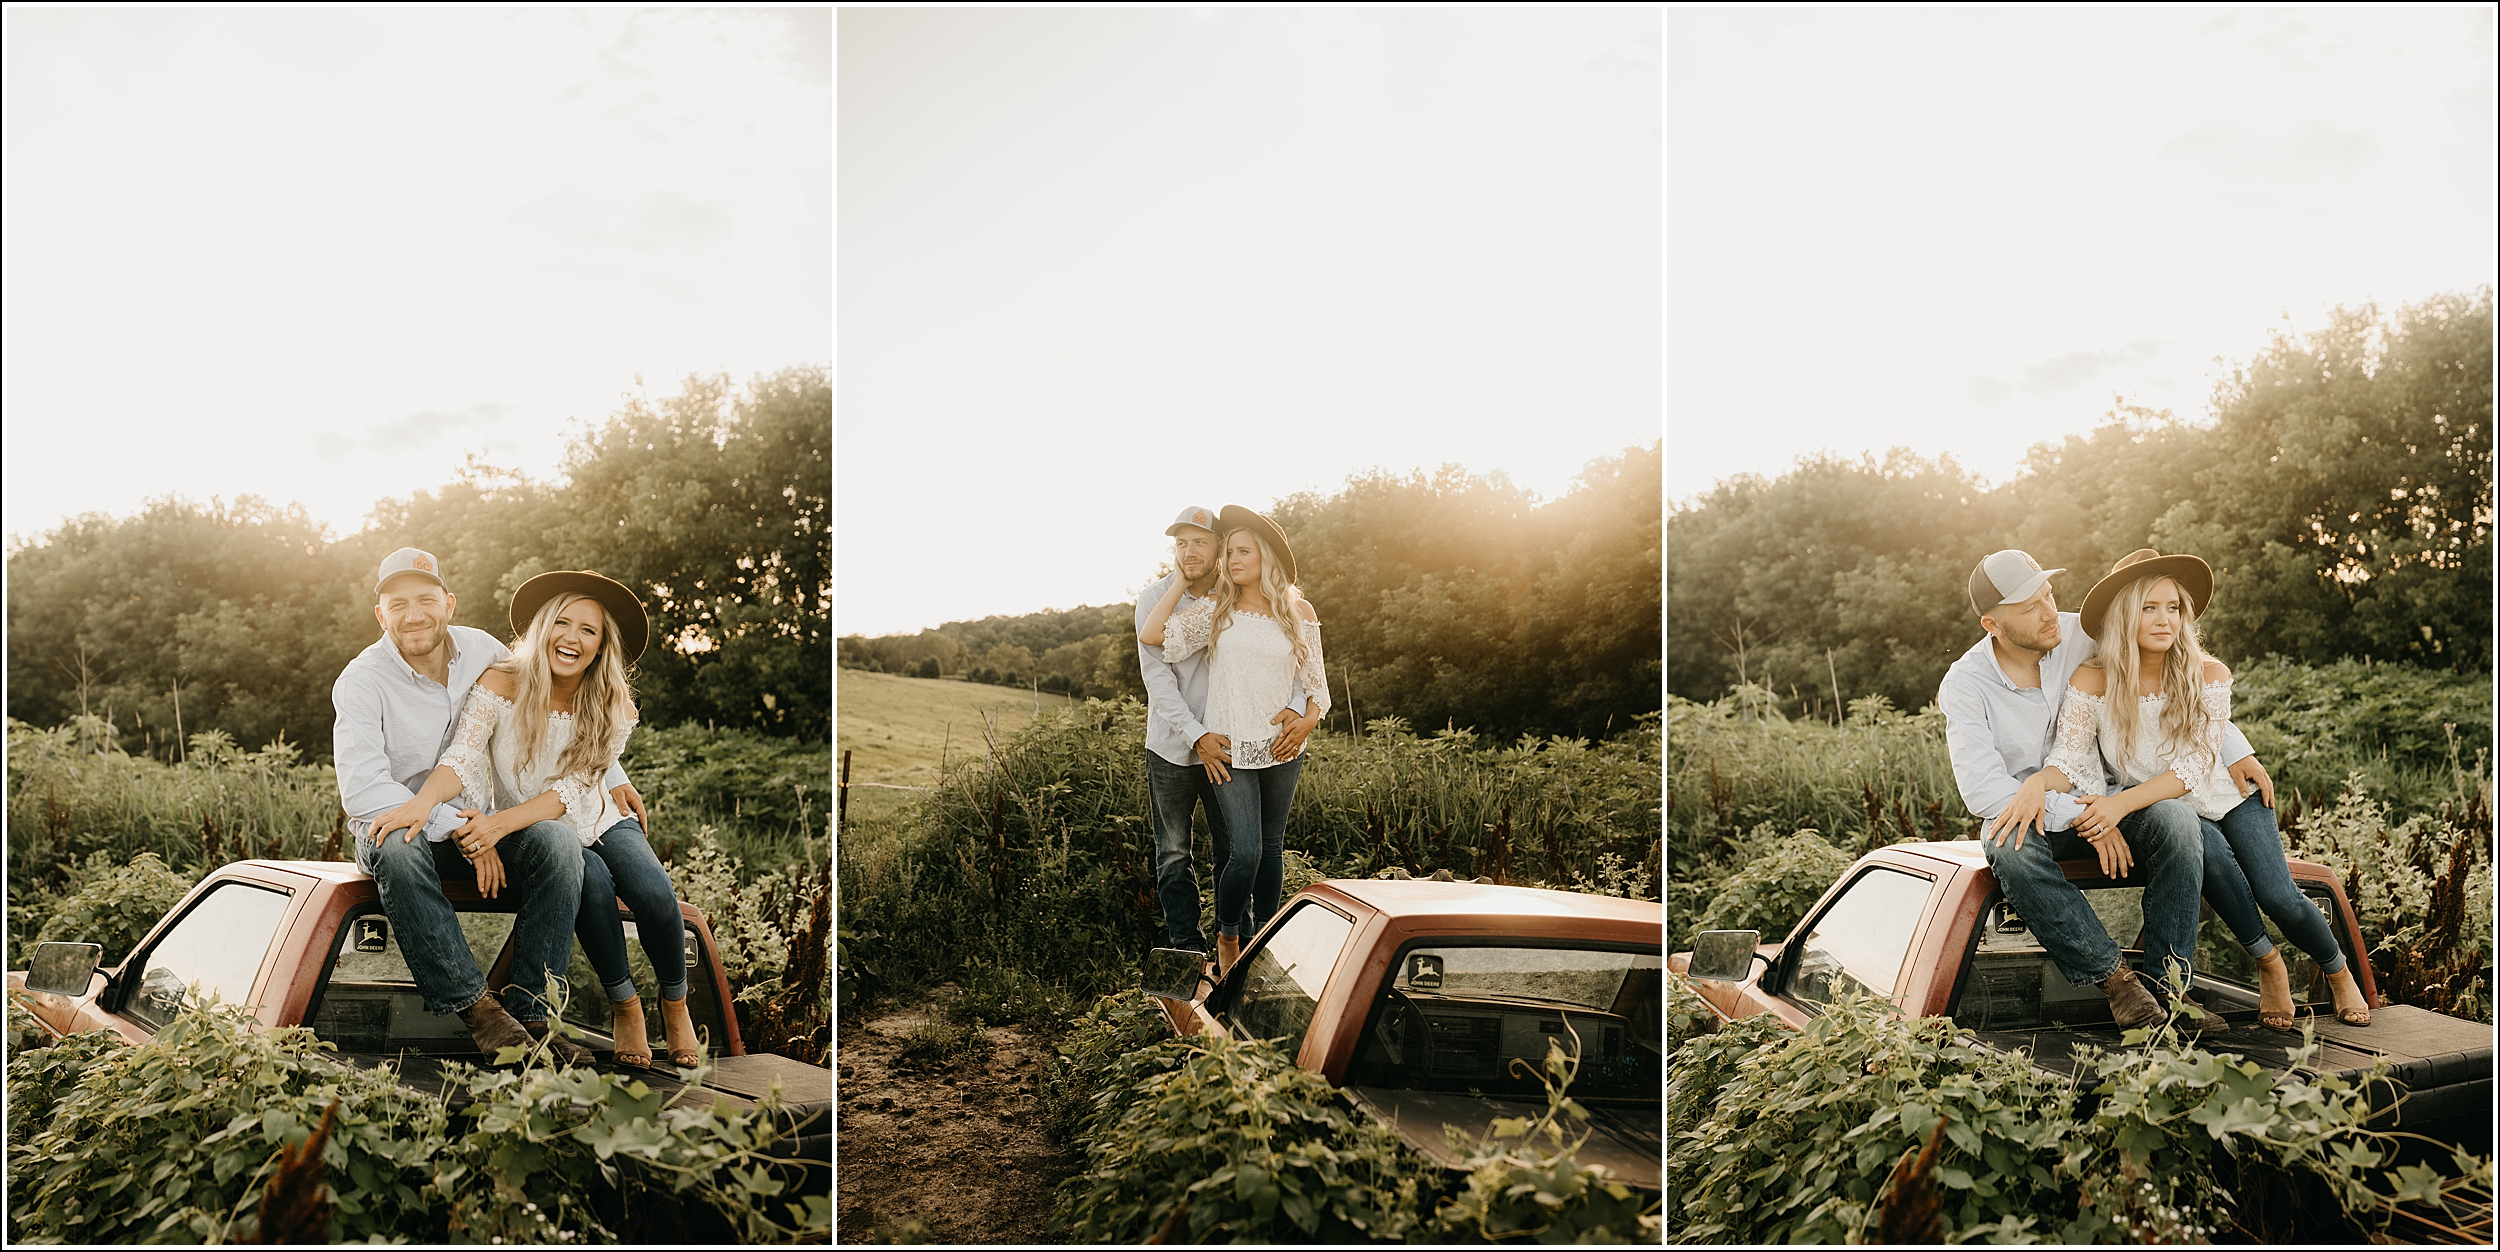 Southeast Minnesota Photographer couple engagement session sitting laughing on truck weeds flowers sunset